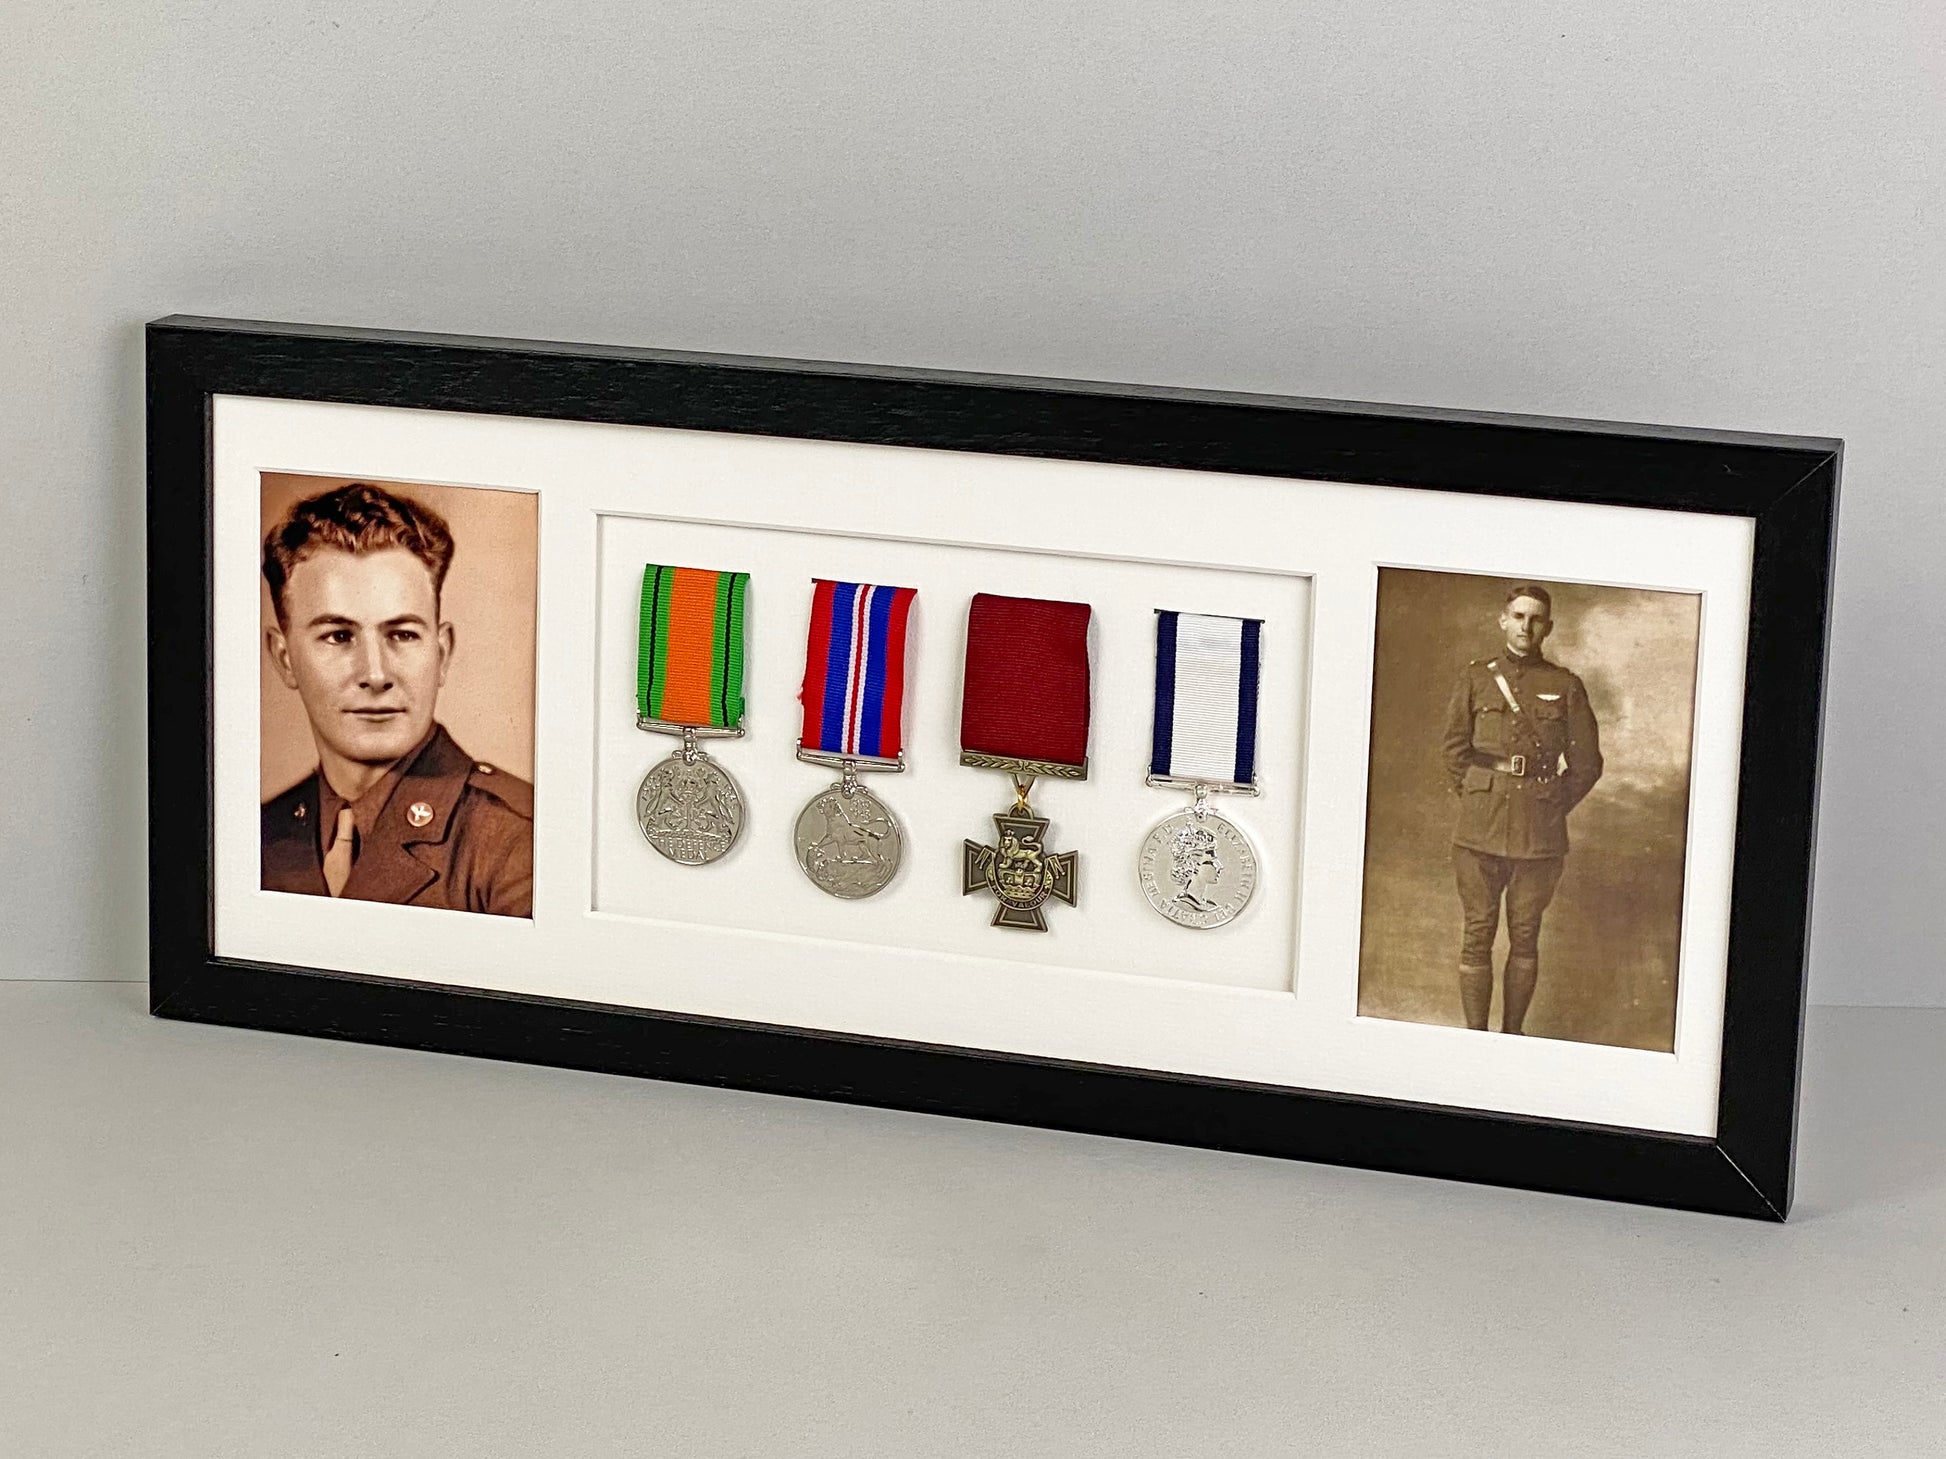 Military and Service Medal display Frame for Four Medals and Two 6x4" Photographs. 20x50cm. - PhotoFramesandMore - Wooden Picture Frames